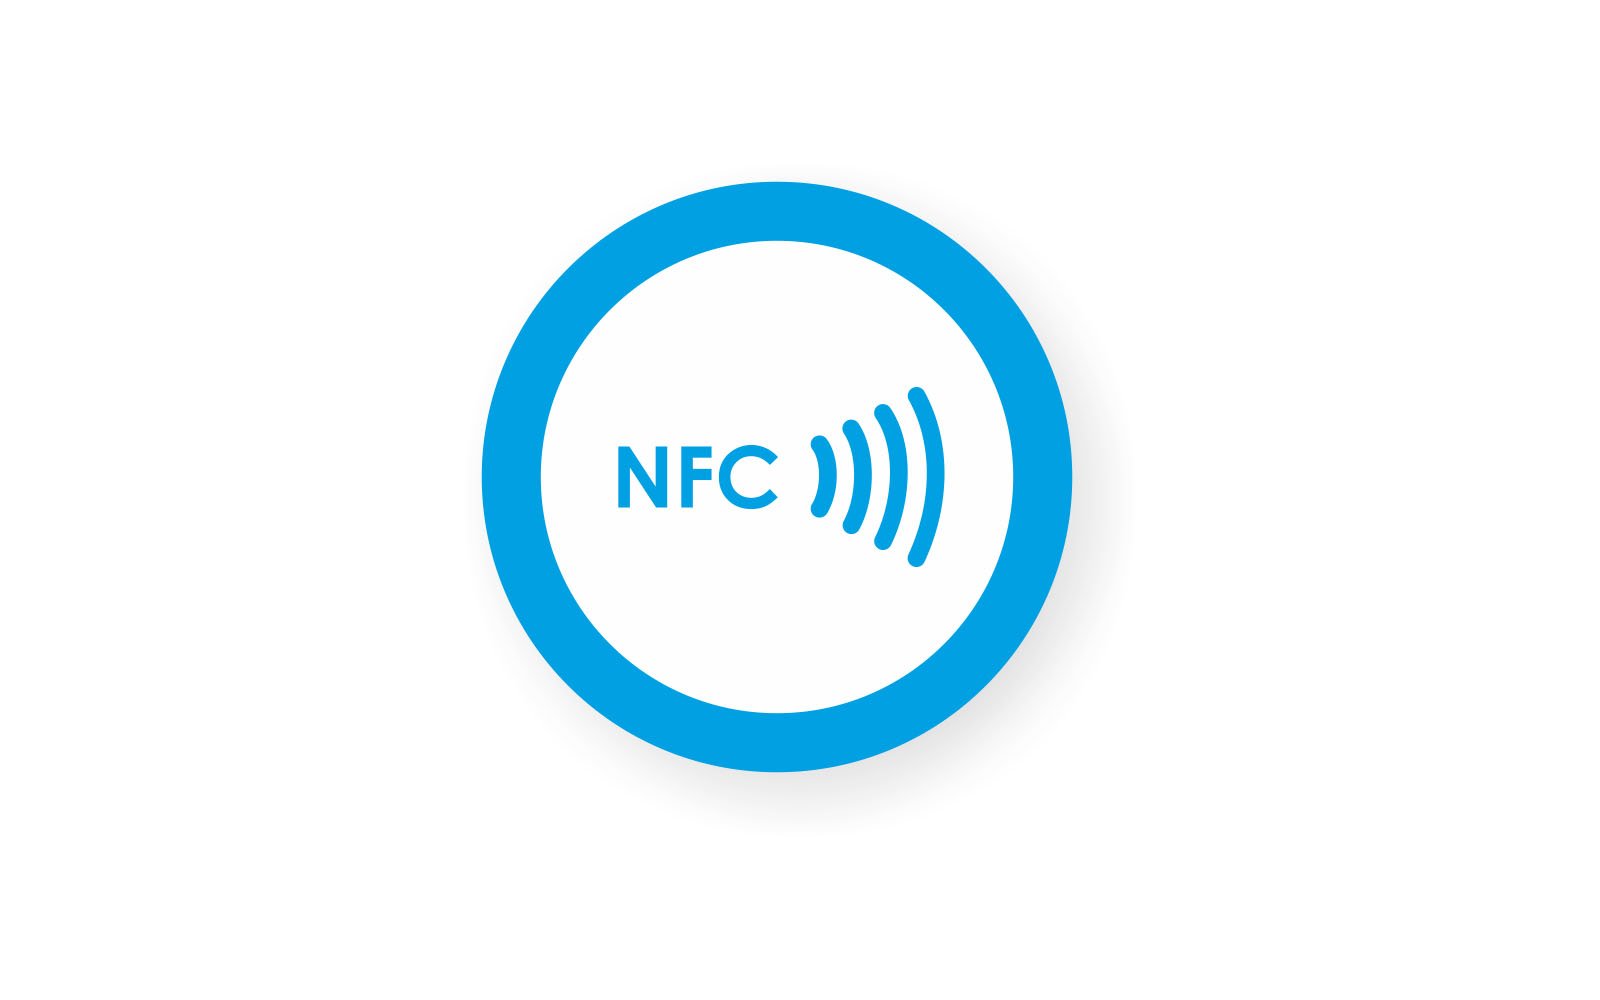 NFC and MagicINFO